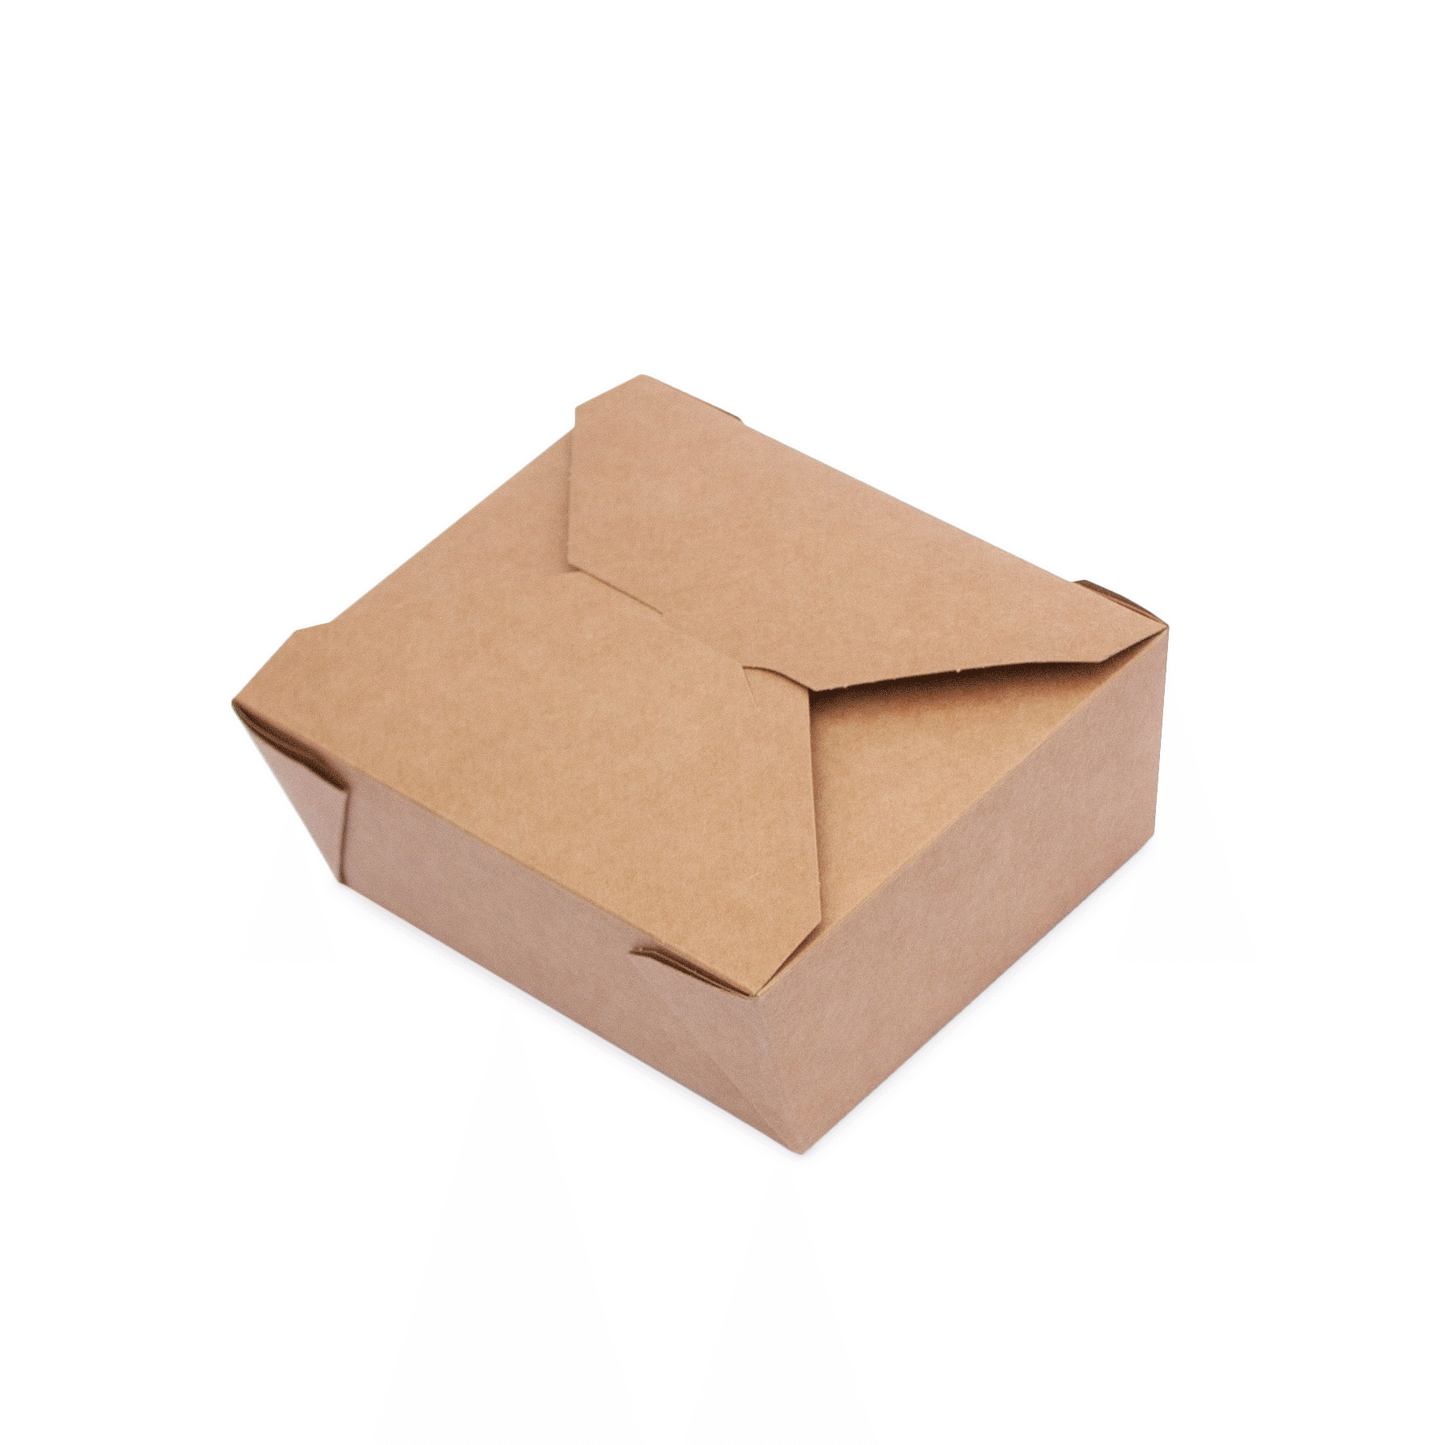 Leakproof food container No.8 kraft food-to-go carton 300 units, 1300ml (15 x 12 x 6.5cm)